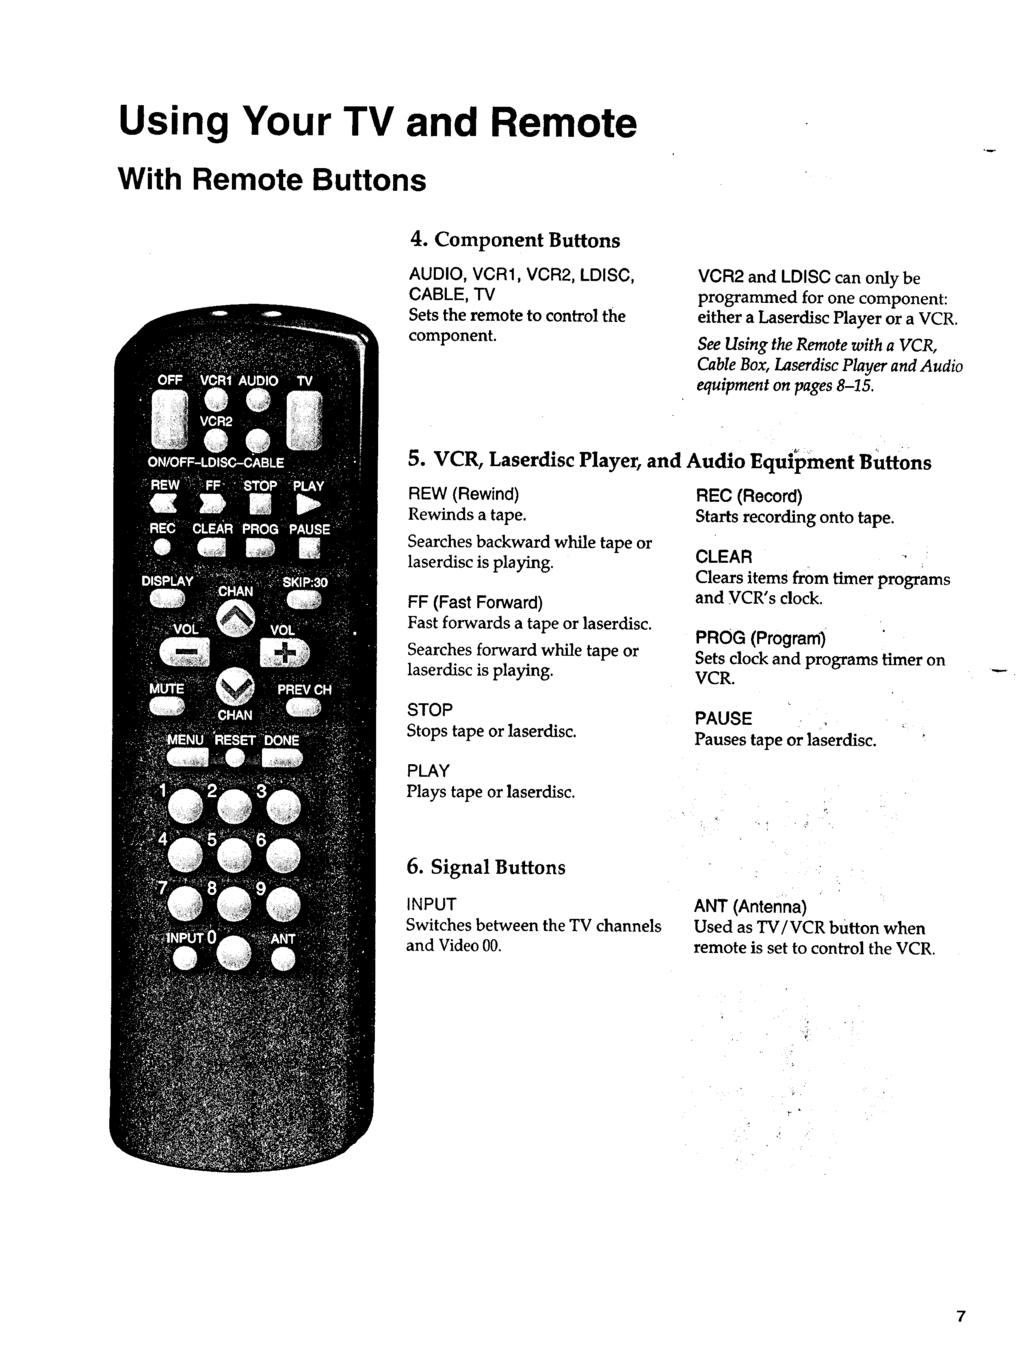 Using Your TV and Remote With Remote Buttons 4. Component Buttons AUDIO, VCR1, VCR2, LDISC, CABLE, TV Setsthe remote to control the component.